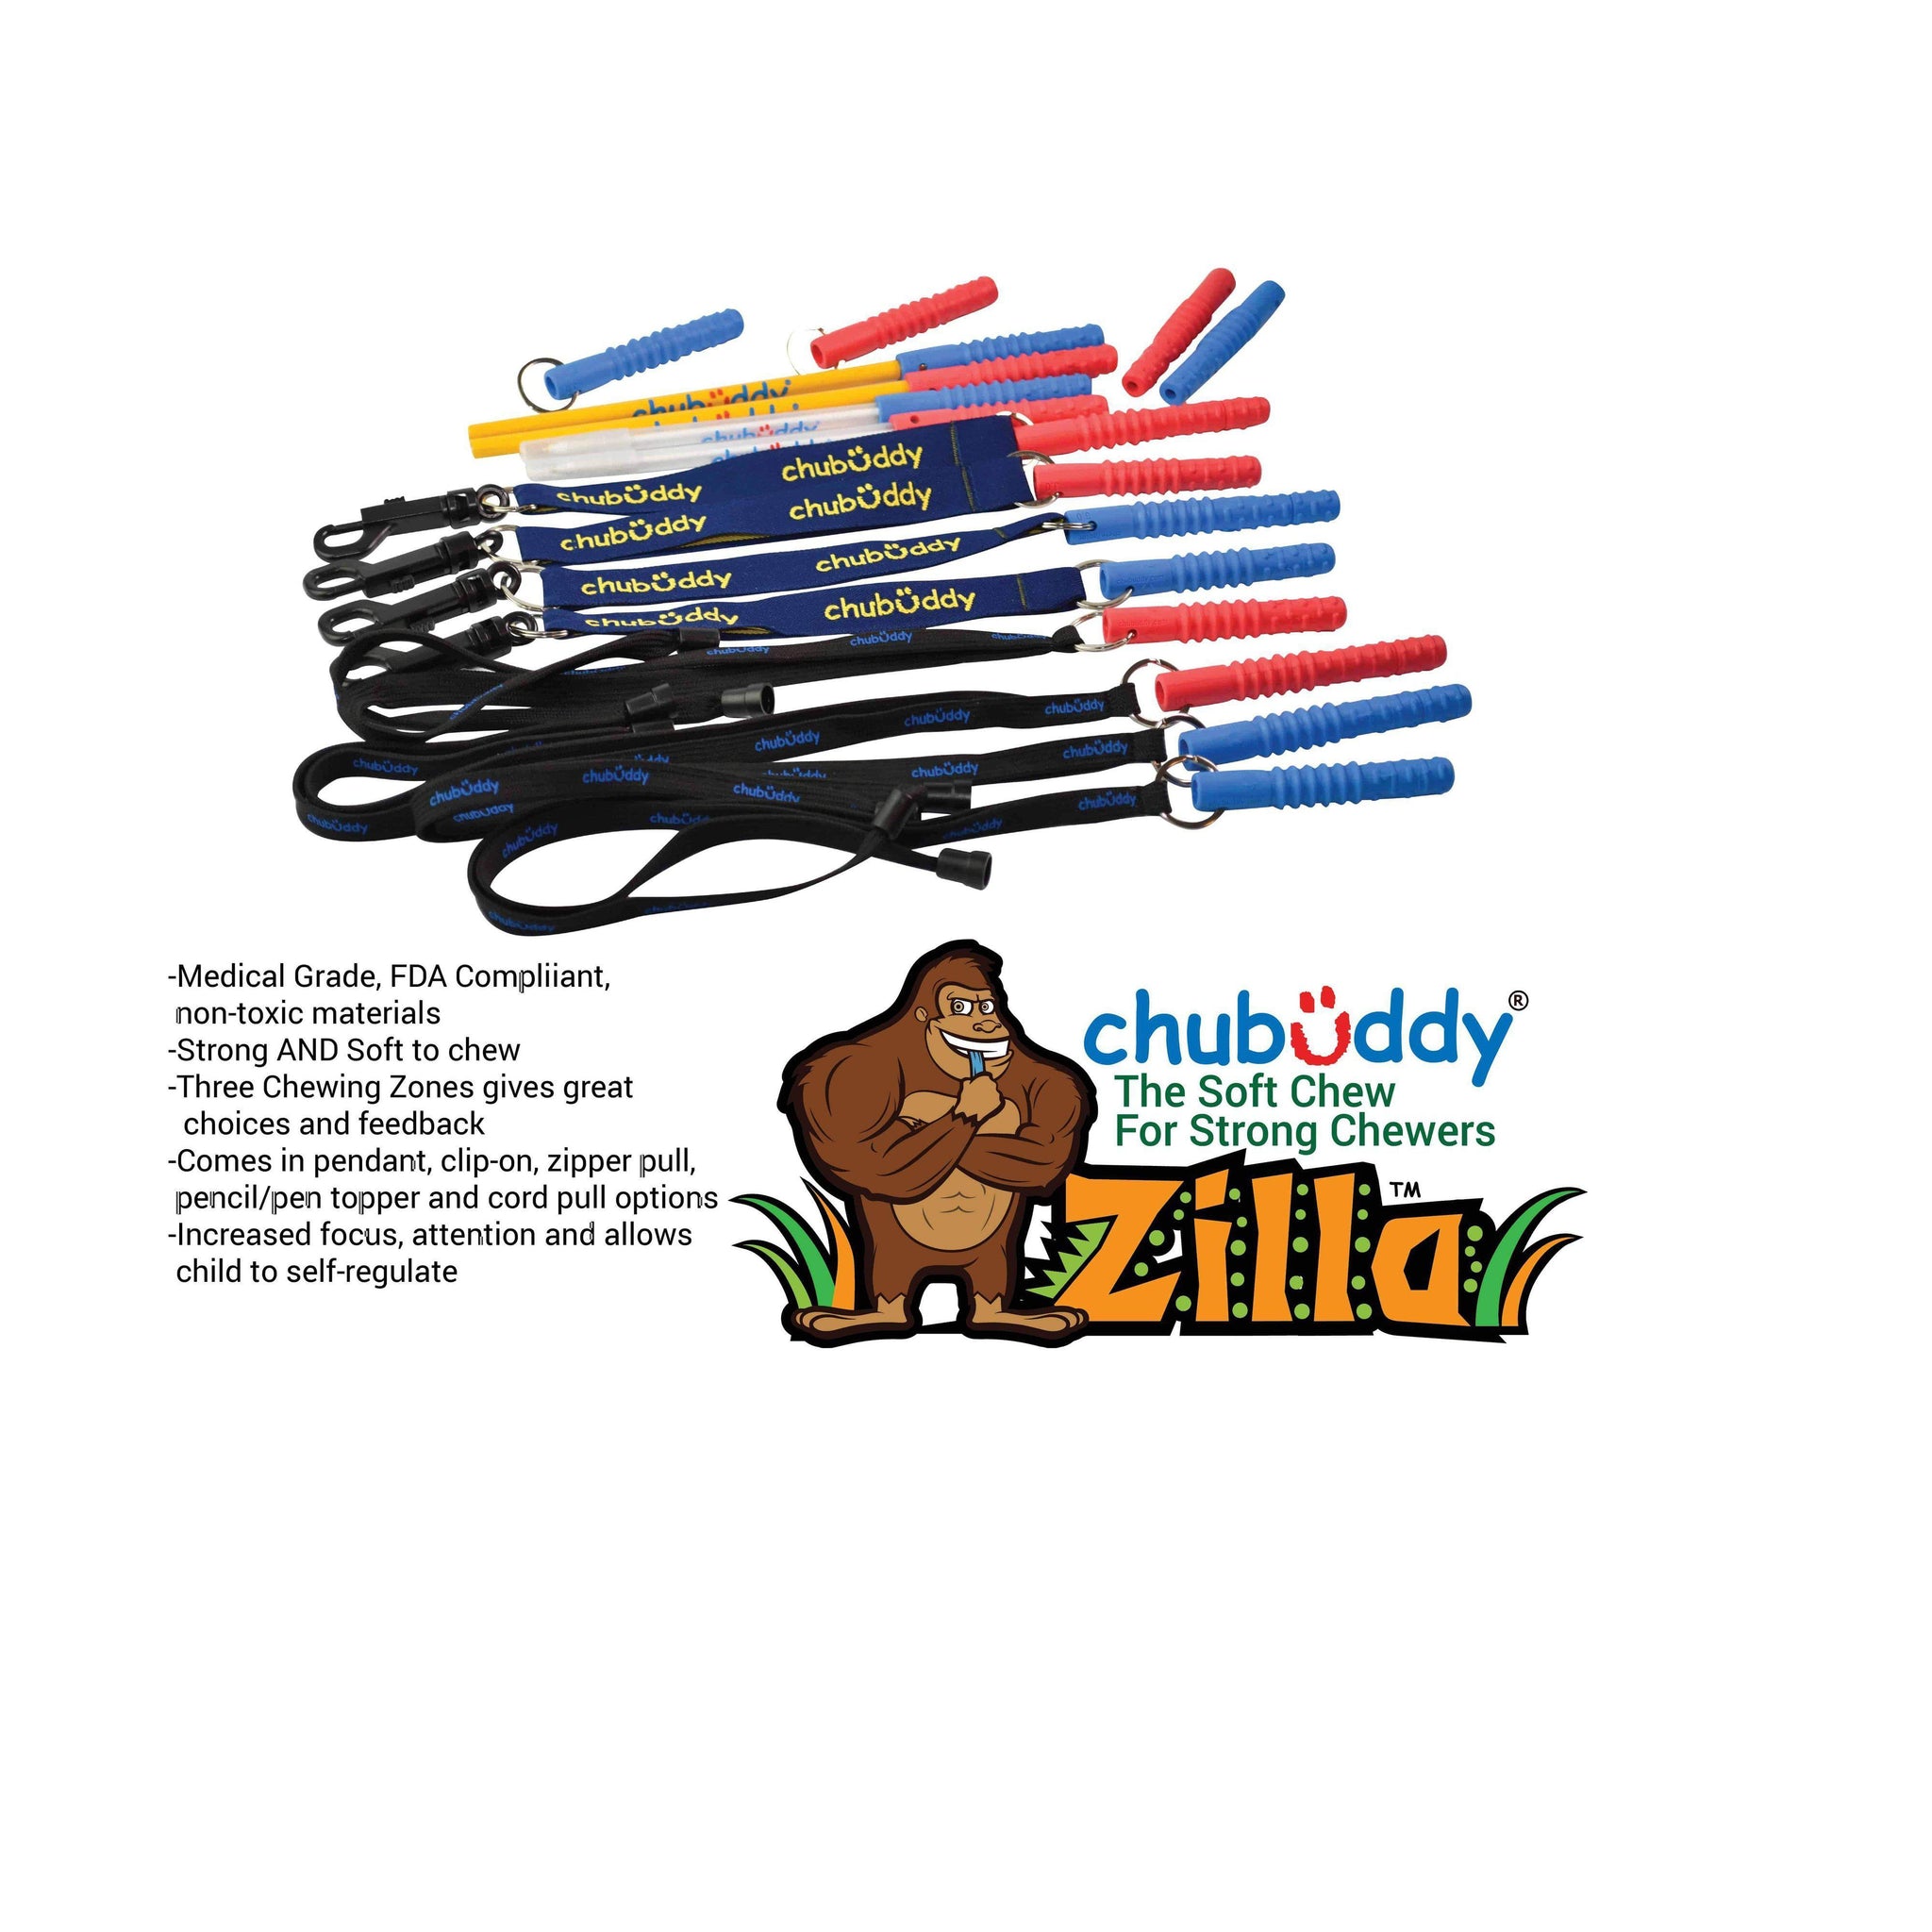 Chubuddy Blue Cord Zilla with Black Cord and Install Pack